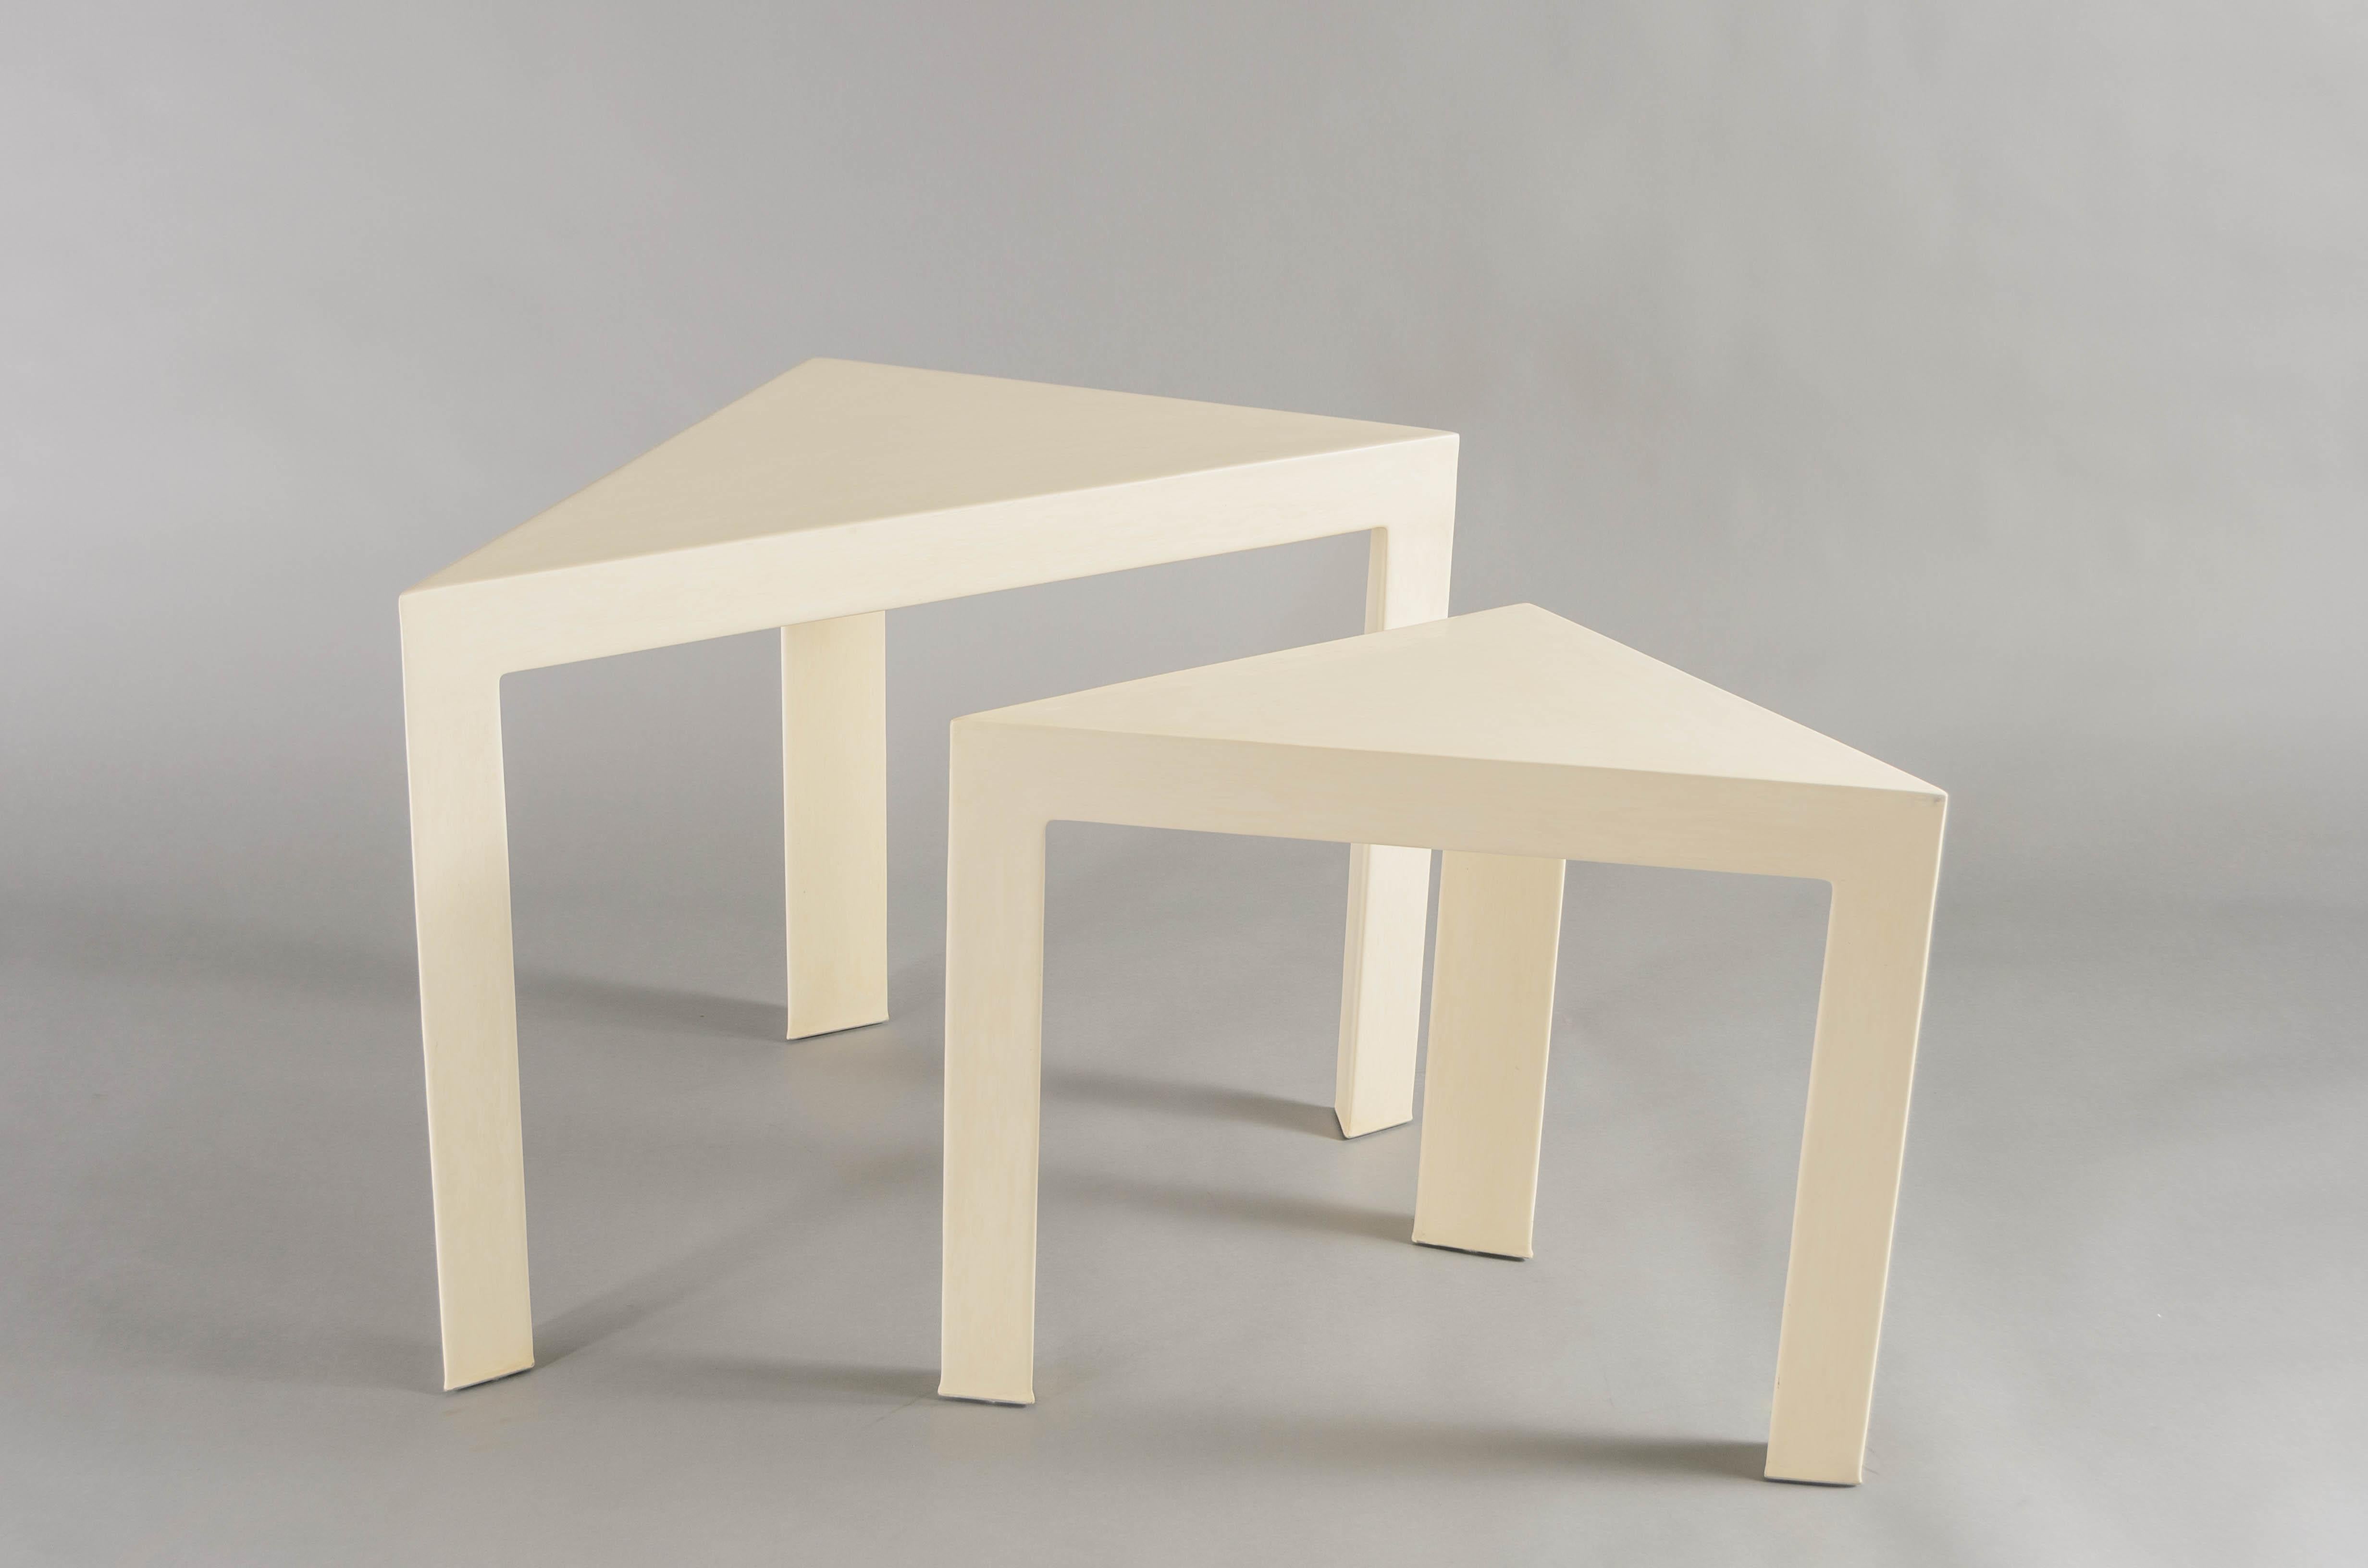 Corner nesting tables - Set of 2
Cream Lacquer
Wood base
Hand made
Limited edition

Lacquer is a technique that dates back to the Shang dynasty, circa 1600-1100 B.C. These pieces are made with at least 60 coats of organic lacquer. Each layer